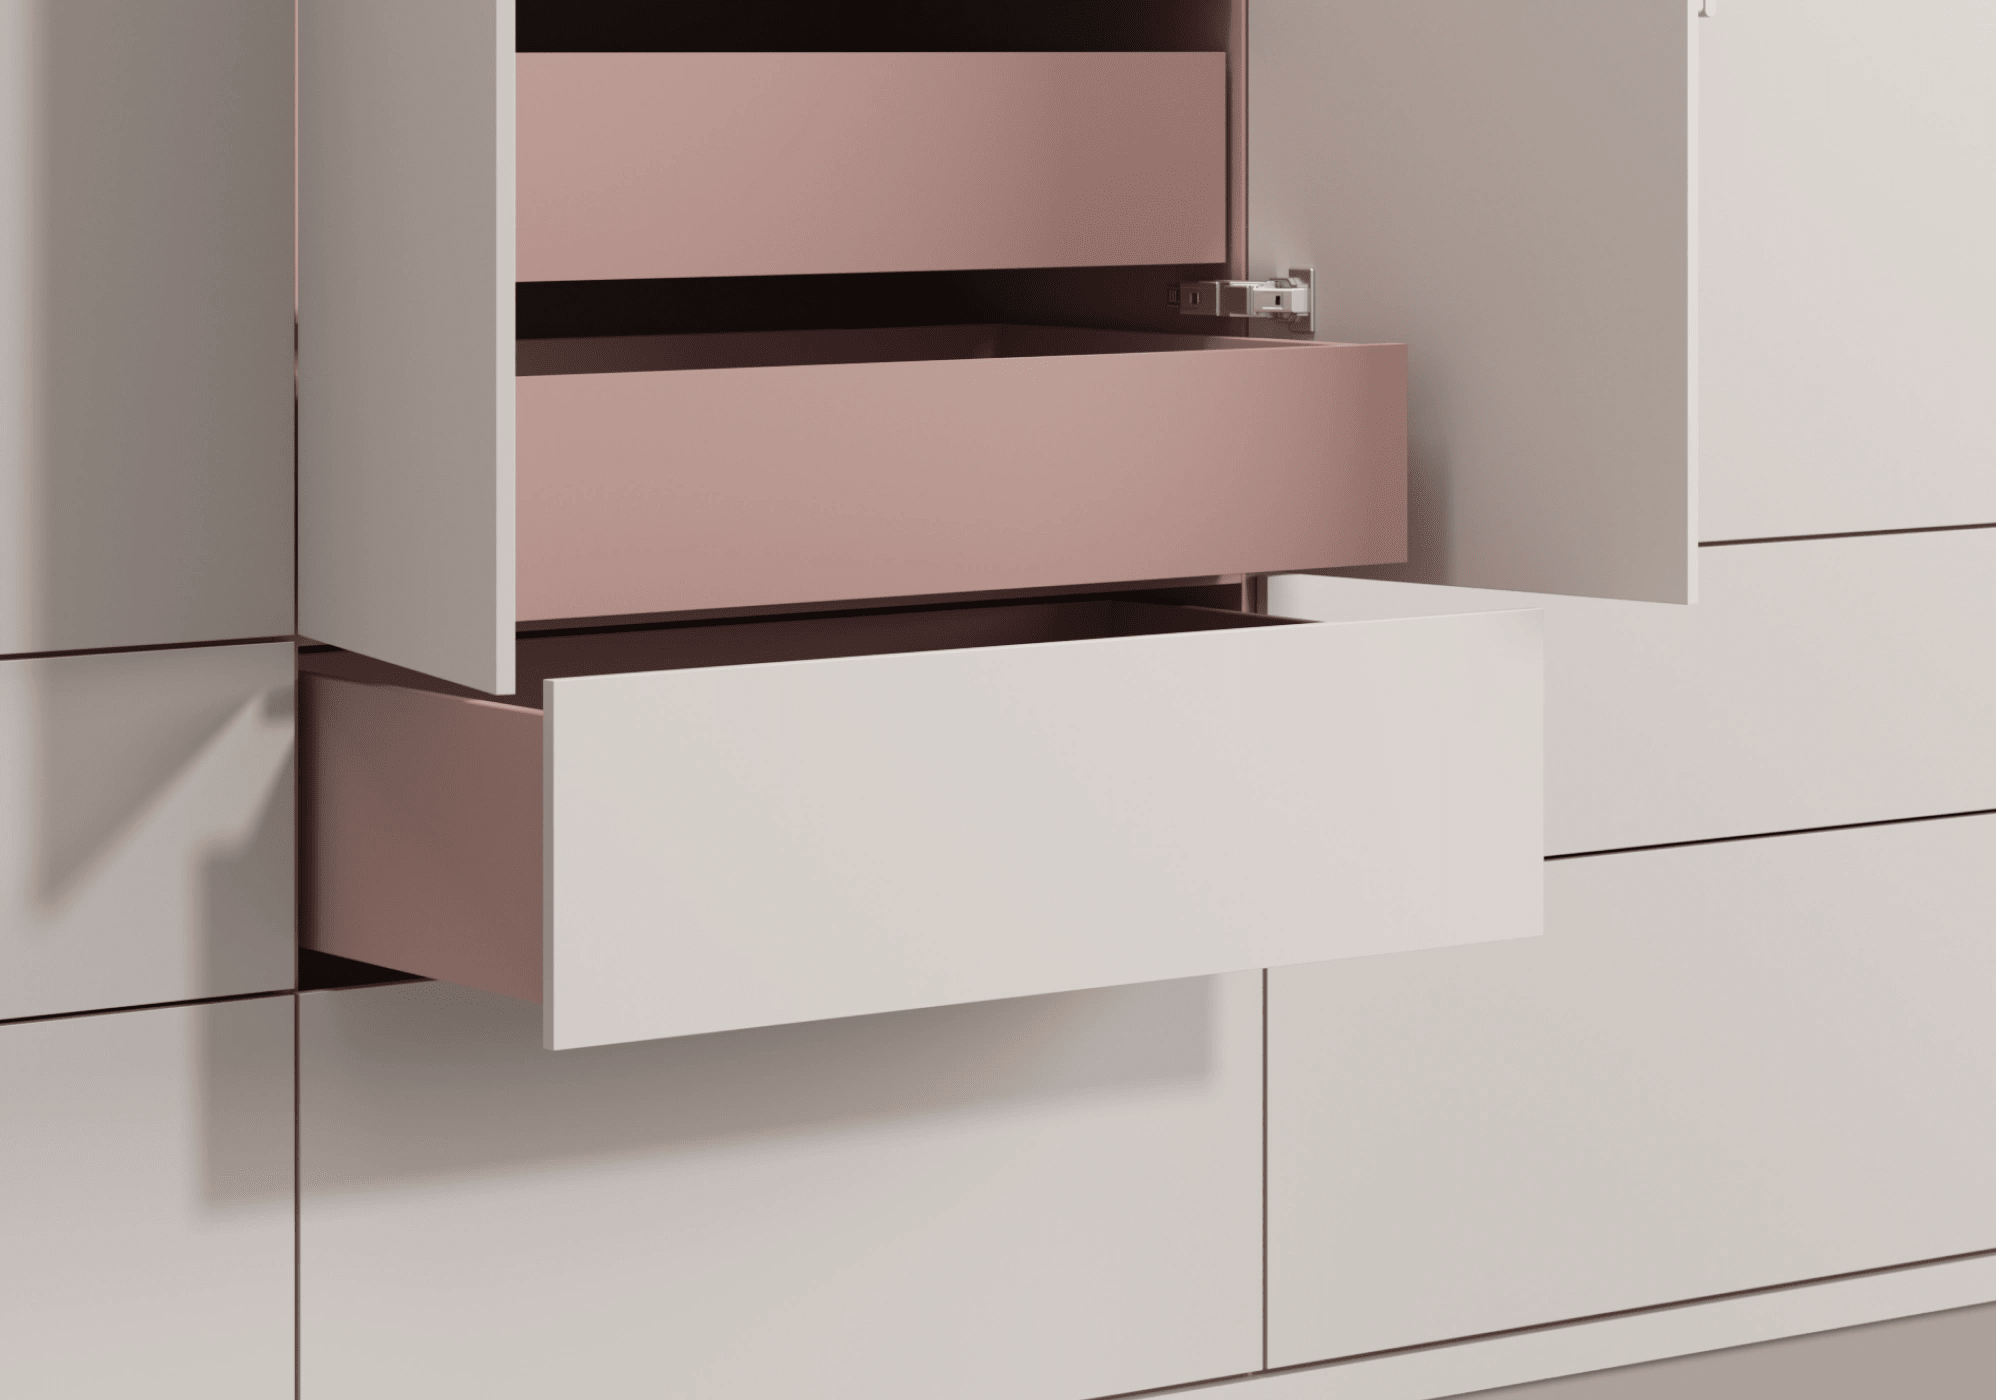 Wardrobe in Beige and Pink with Internal Drawers and Rail 6